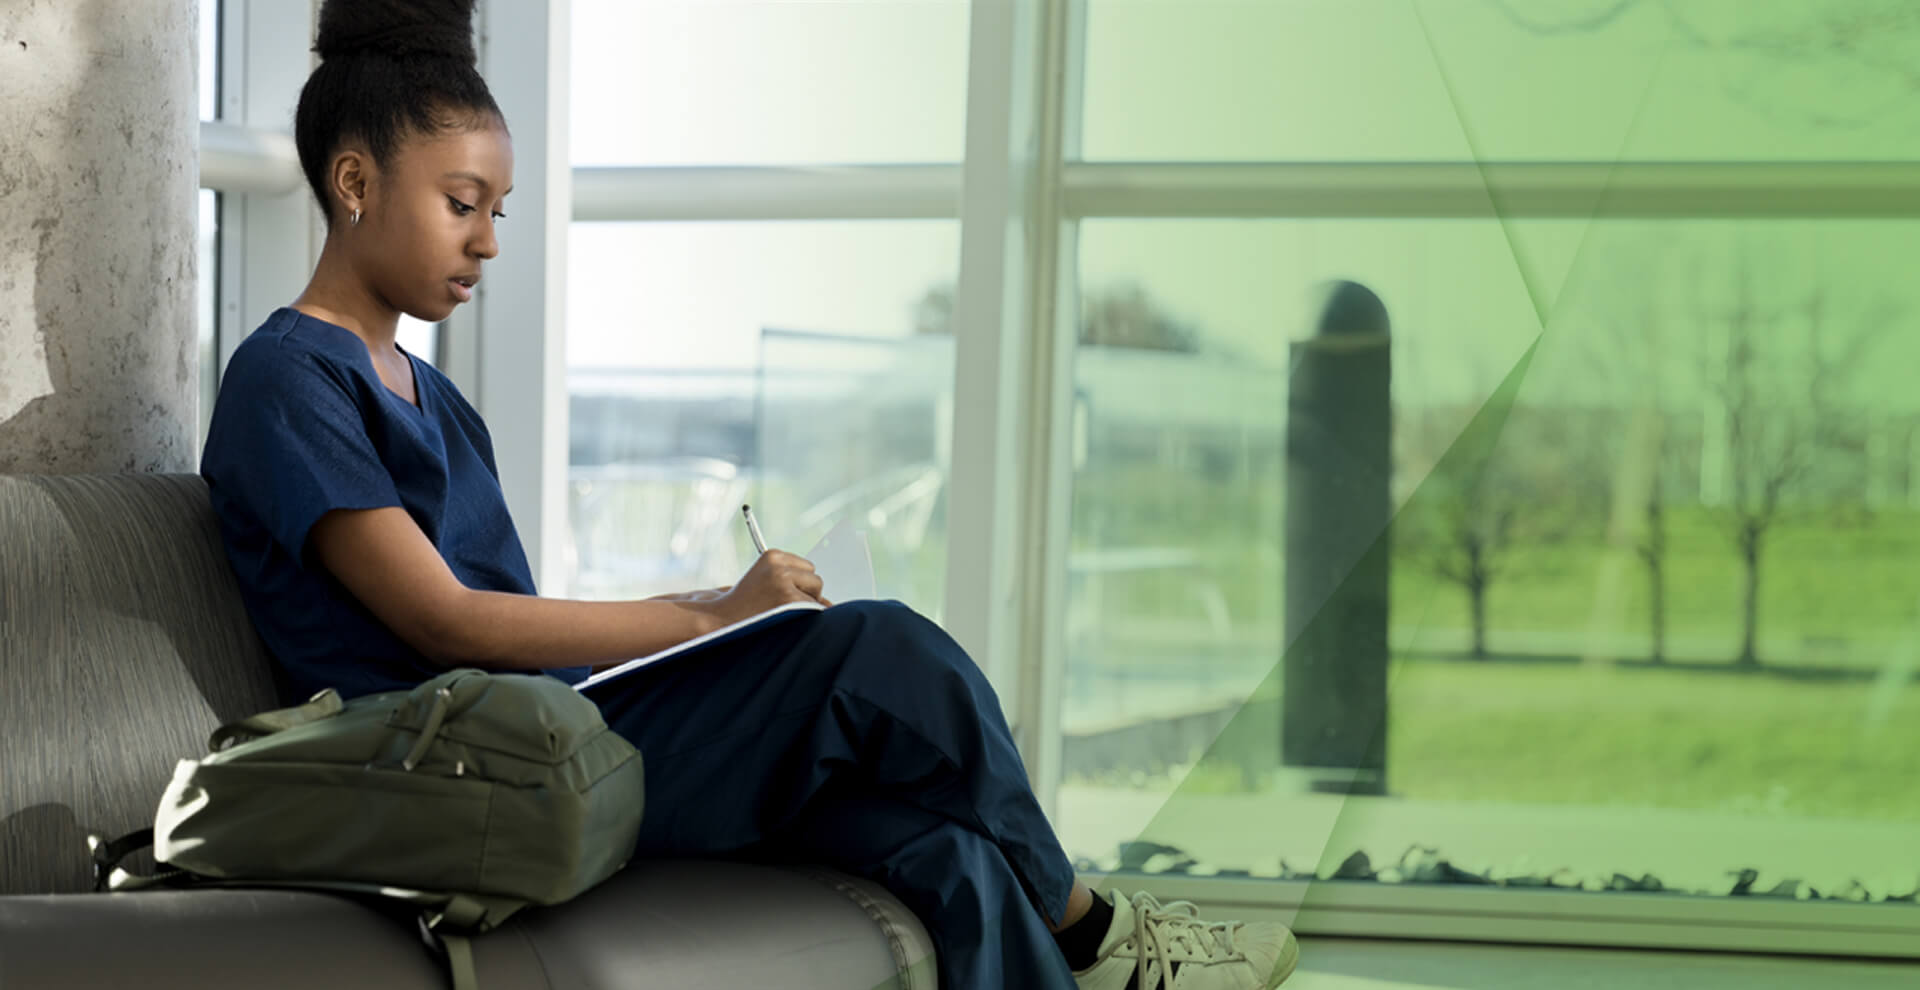 A young nurse writes notes while sitting on a bench